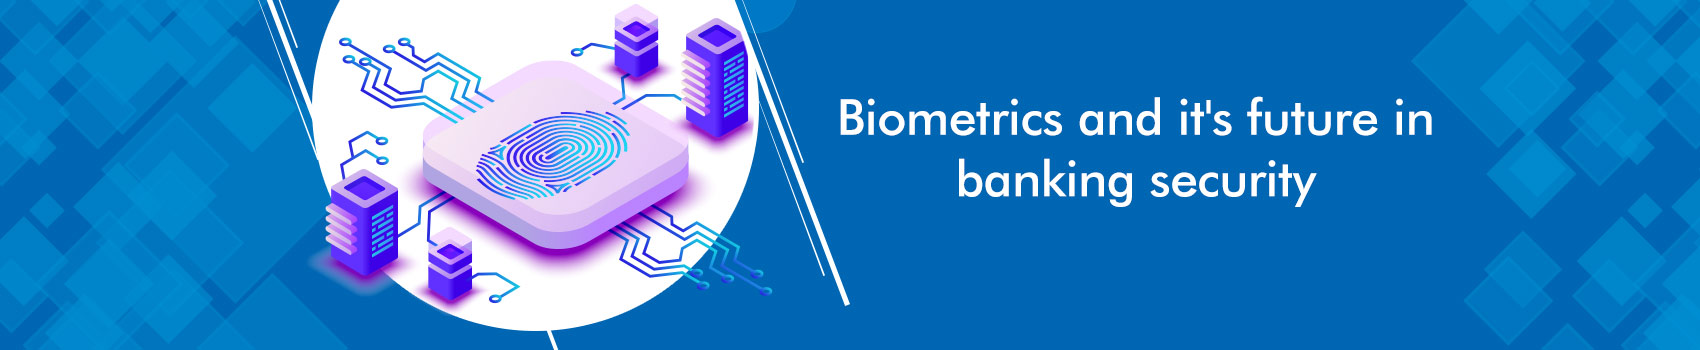 Biometrics and it’s future of banking security